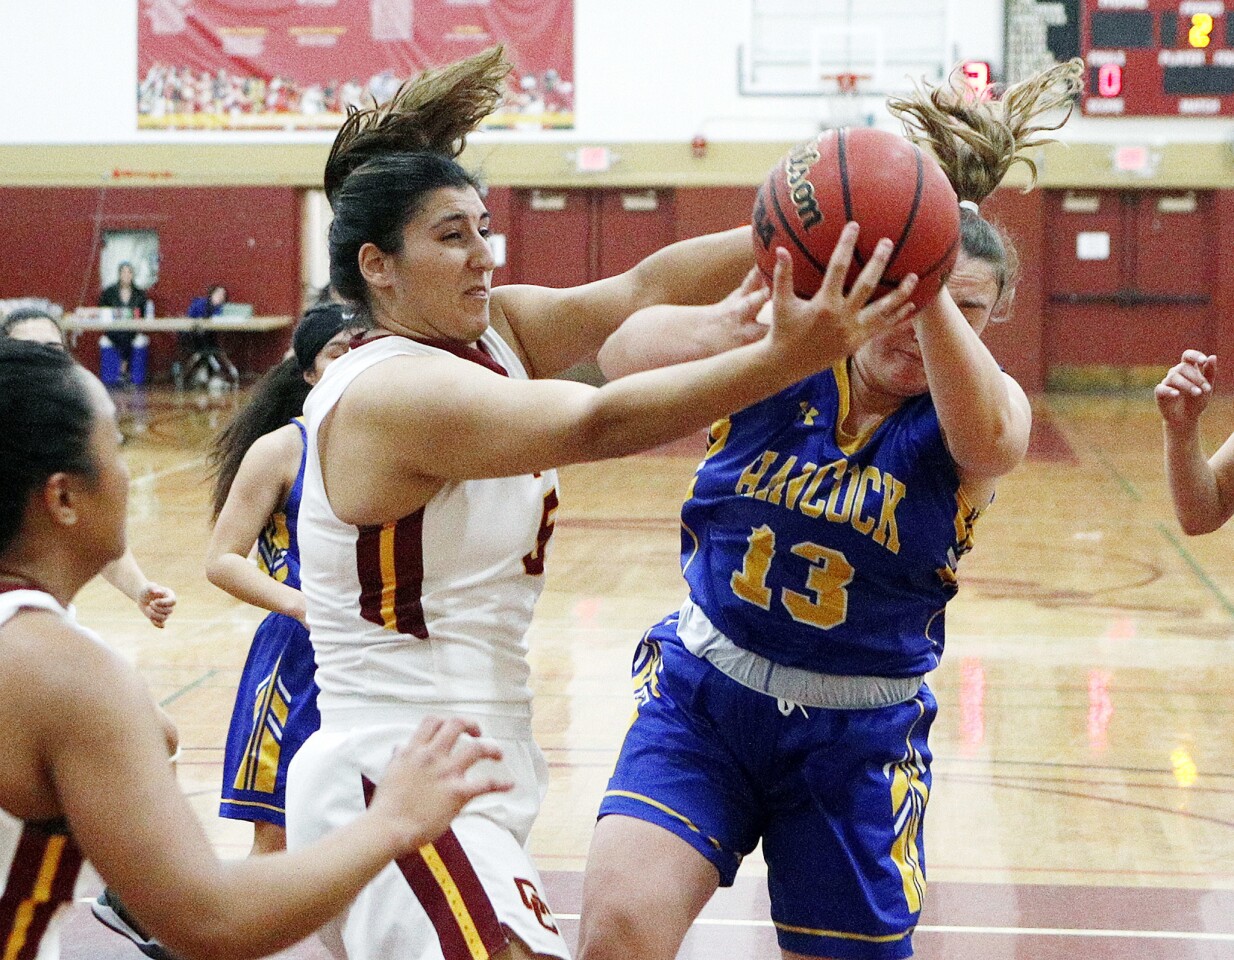 Glendale College's Sylvia Vartazarian and Allan Hancock College's Willow Bailey battle for a rebound in the first half of a Glendale College Vaqueros holiday tournament women's basketball game at Glendale Community College on Wednesday, December 19, 2018.